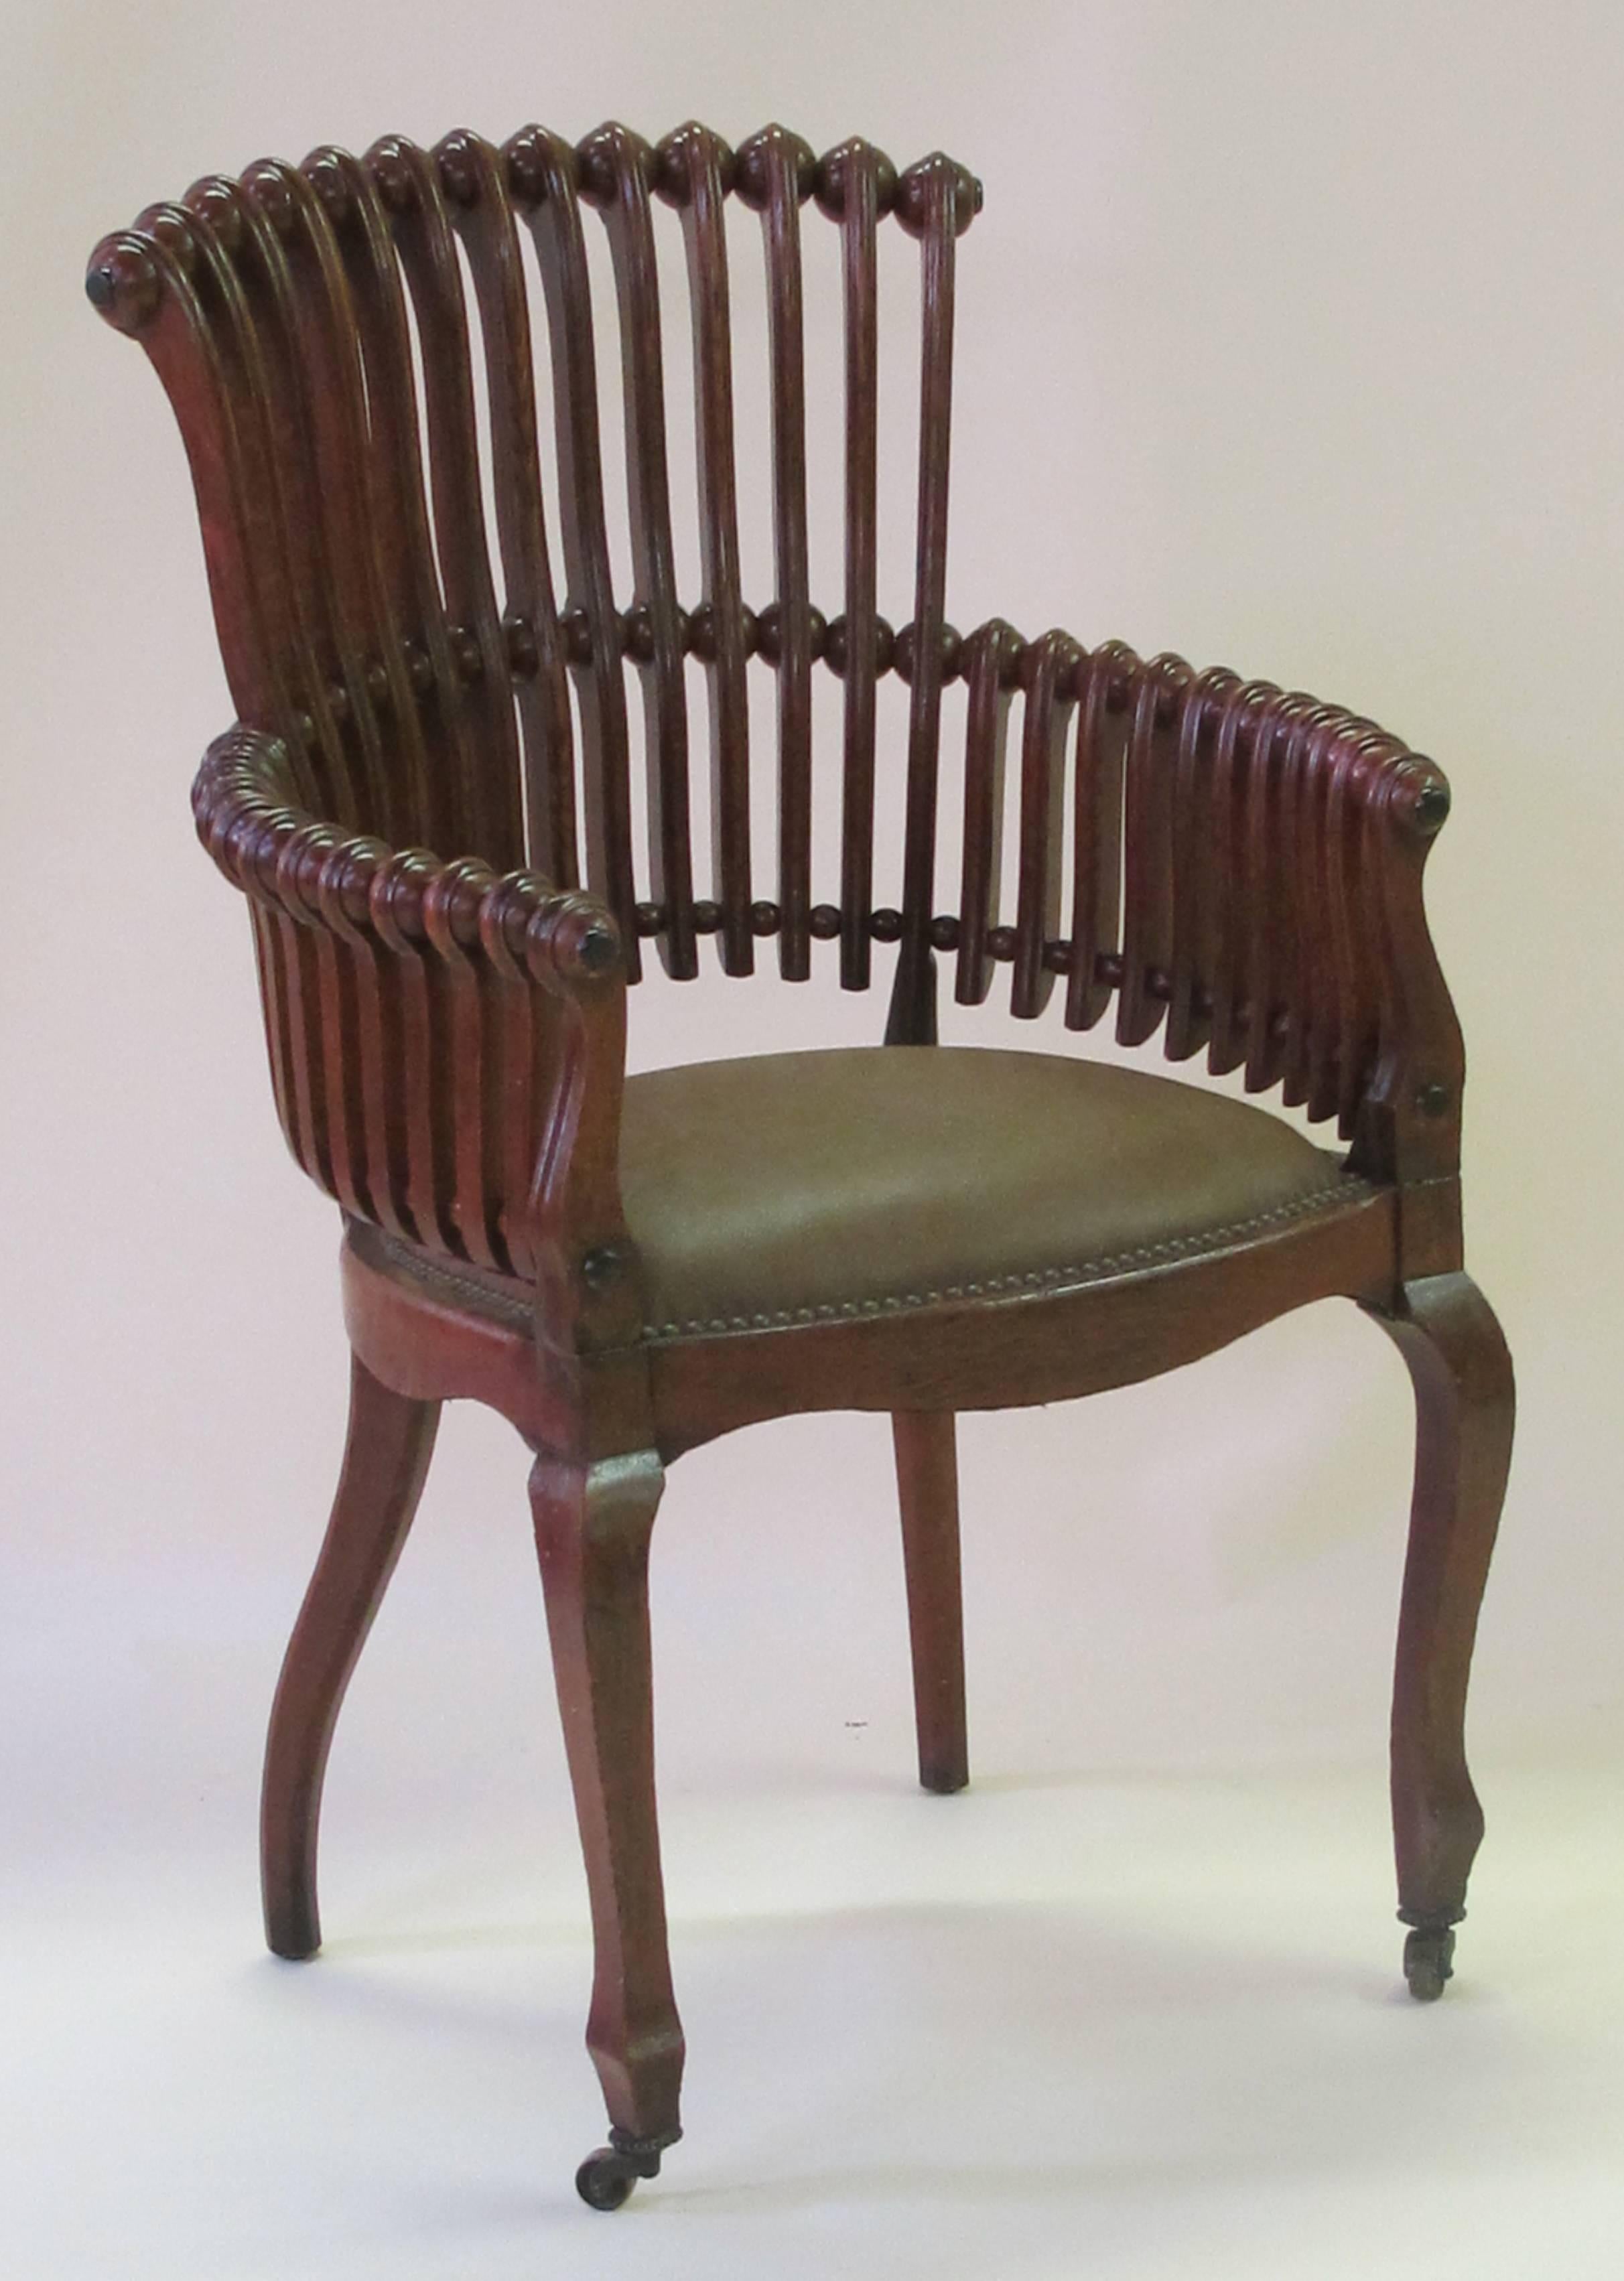 An iconic American aesthetic movement oak 'lollipop' arm chair by George Hunzinger (1835-1898); this well-crafted chair consisting of carved spheres mounted on spindles mimicking a child's candy sucker; new leather seat; the furniture of George